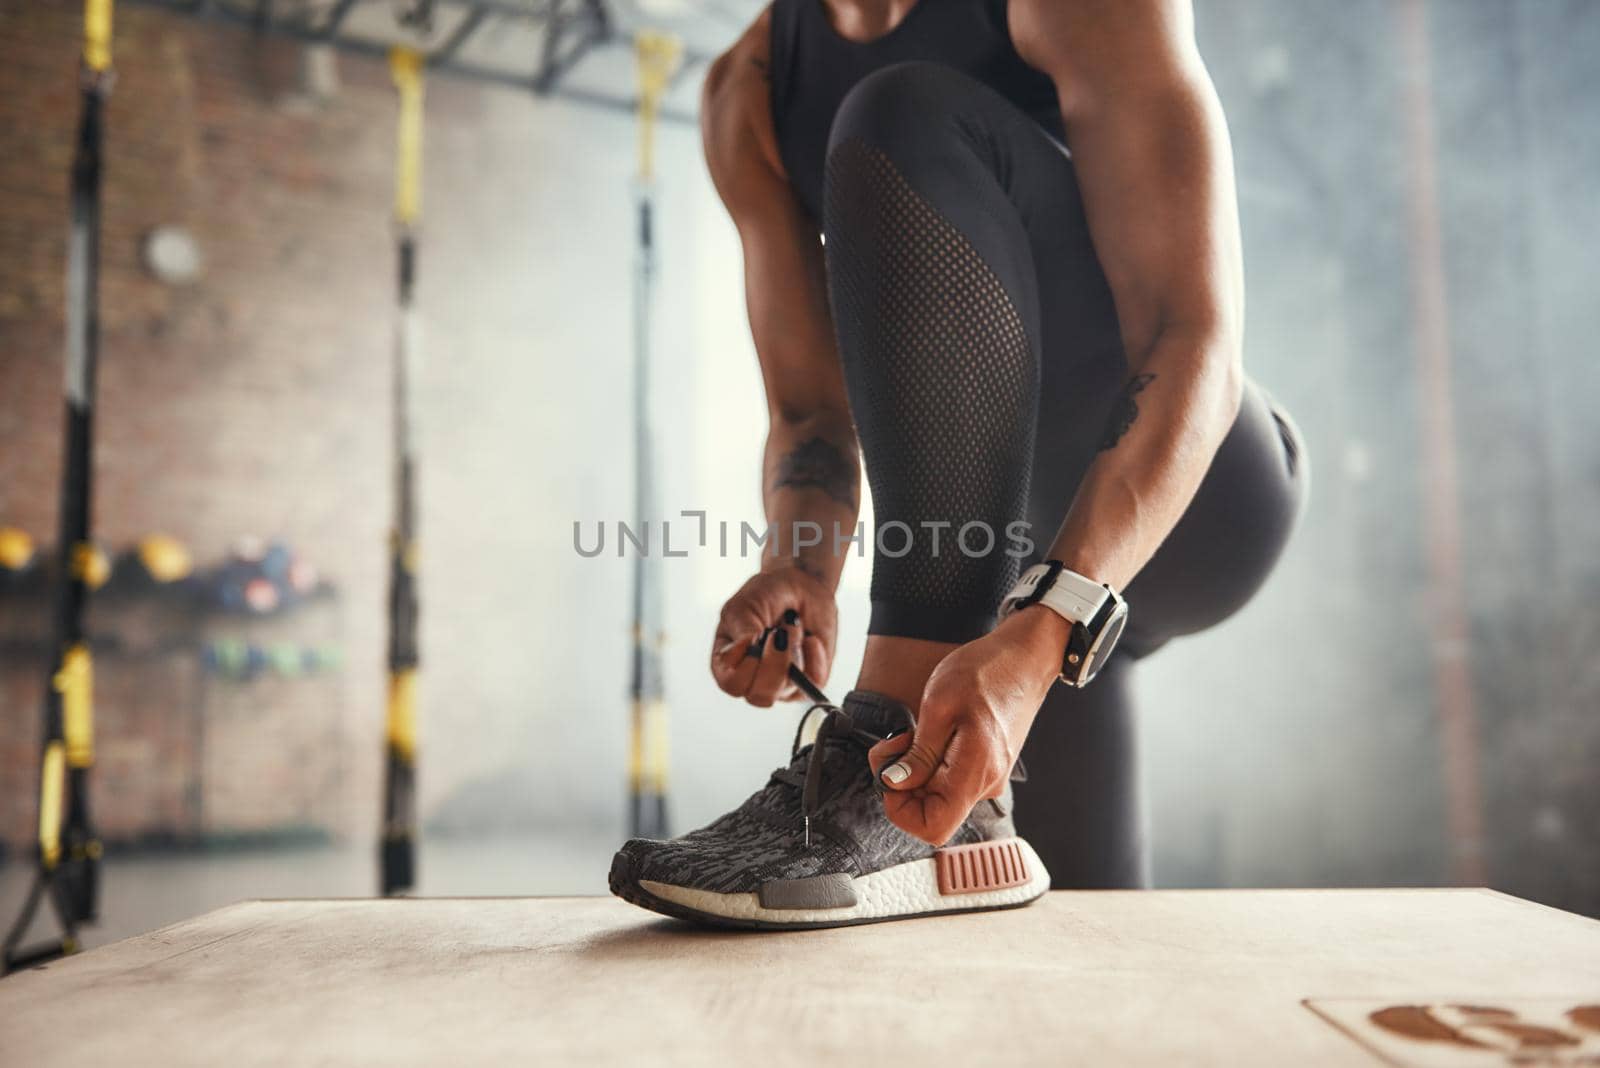 Preparing for workout. Cropped photo of beautiful young woman in sports clothing tying her shoelaces while exercising in gym. Professional sport. TRX Training. Healthy lifestyle